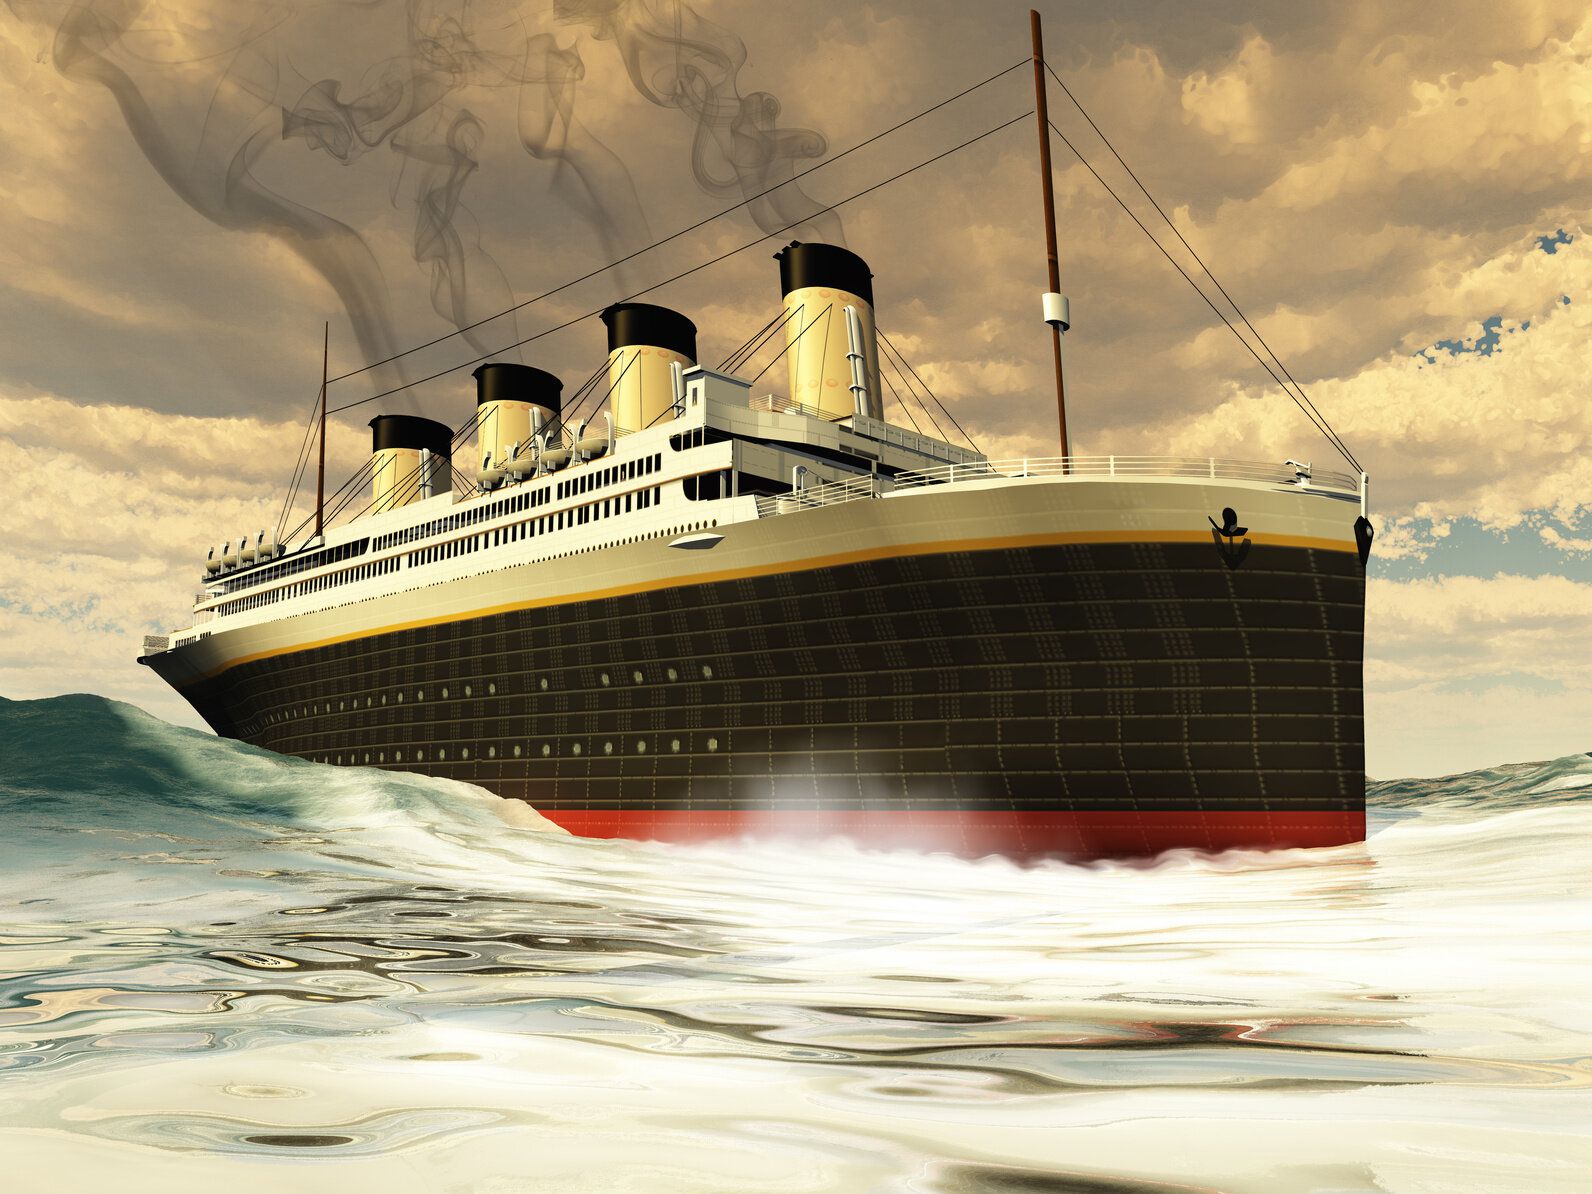 Will the Titanic II Sail? Take A Look At What She Will Look Like